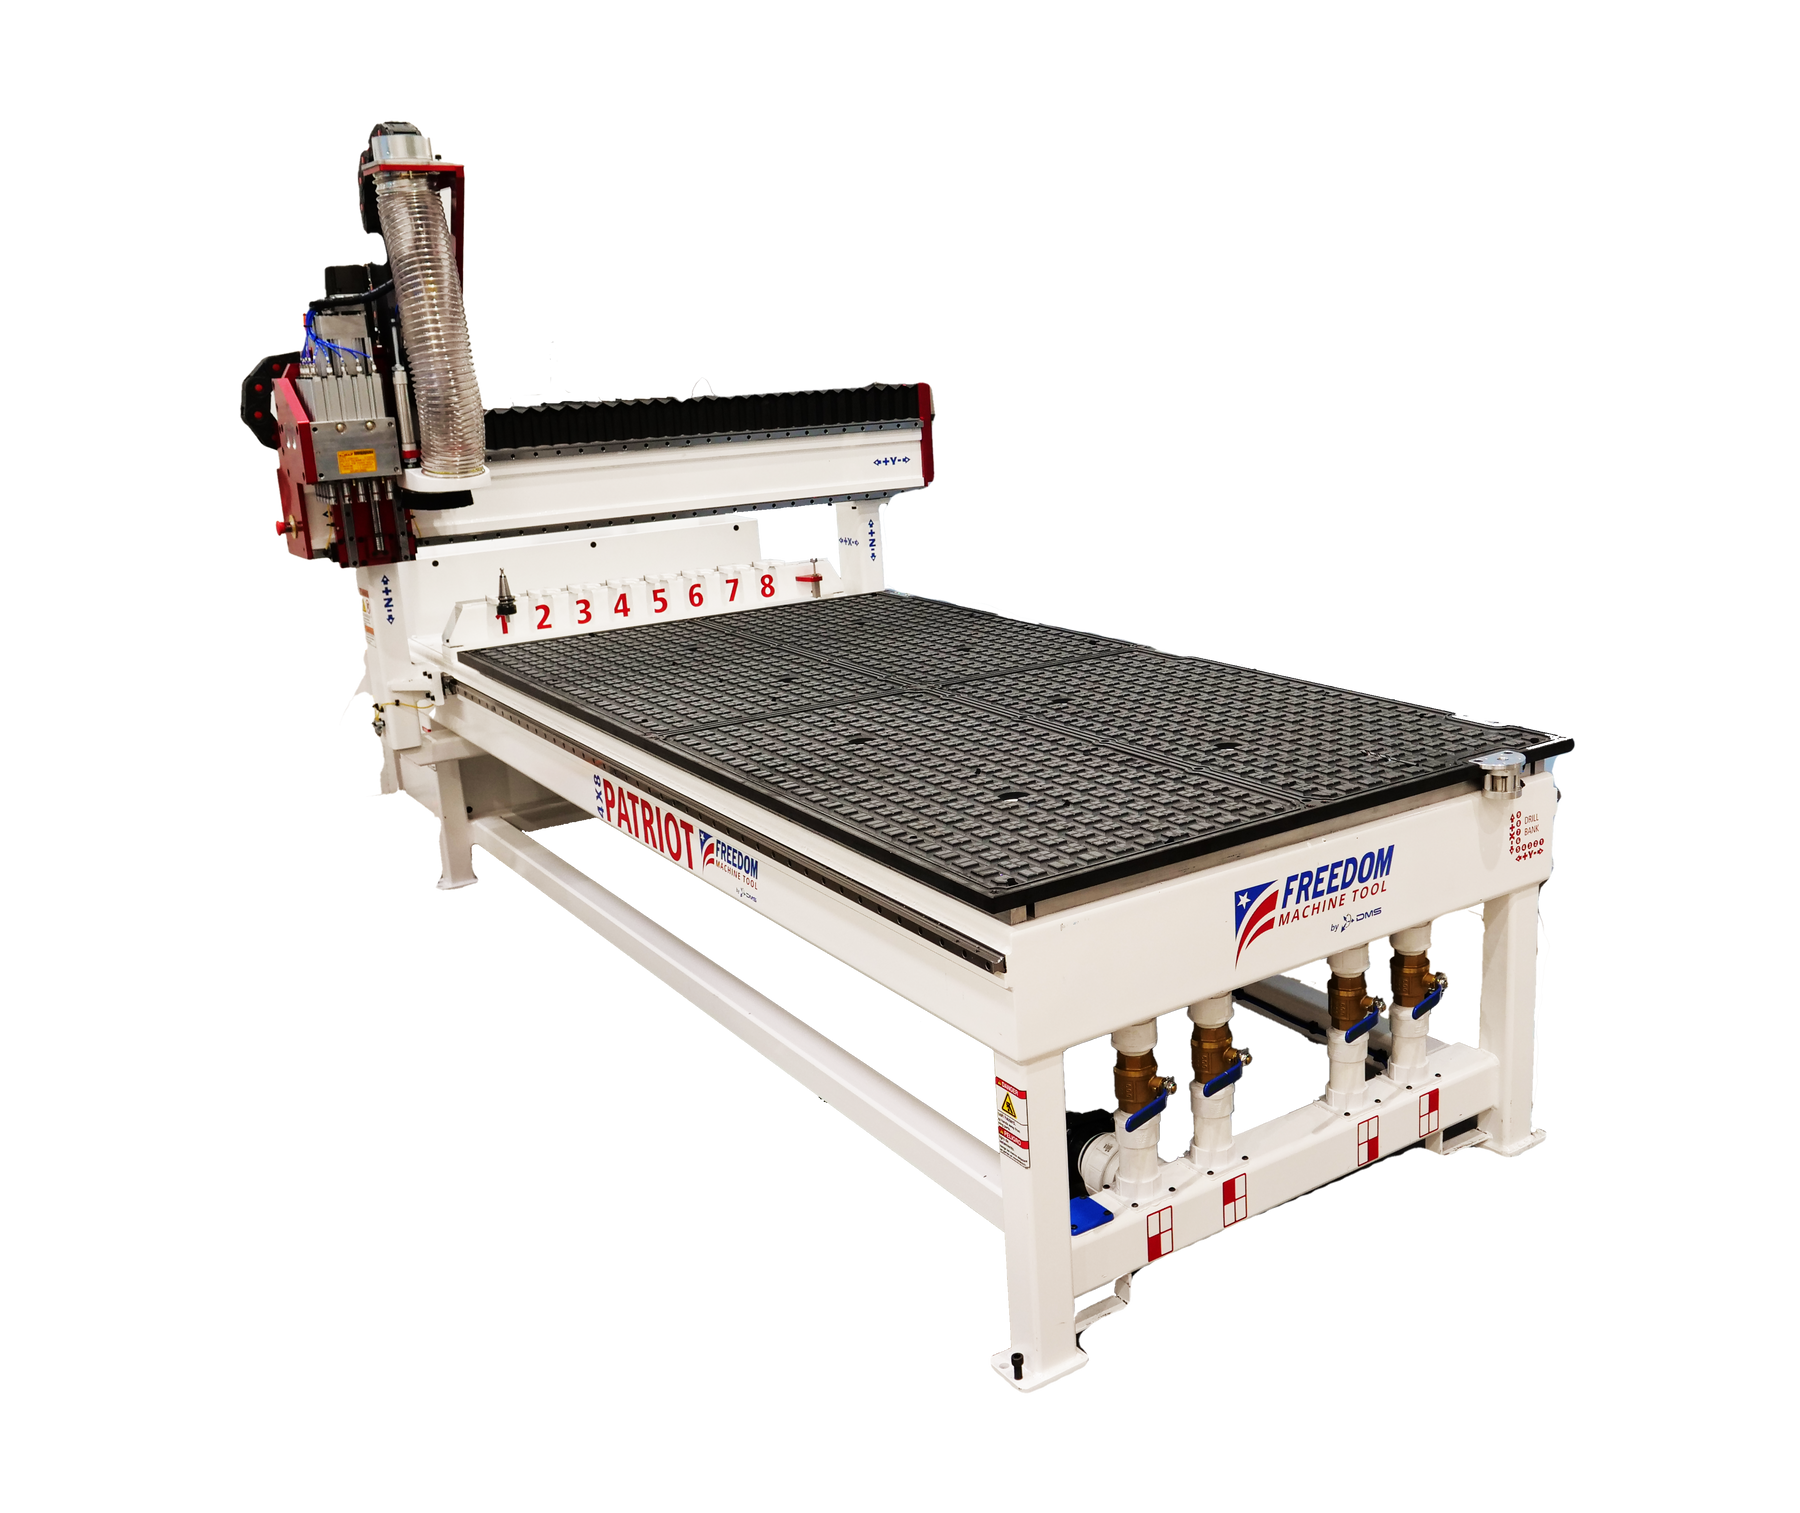 DMS Freedom Patriot 4X8 CNC Router